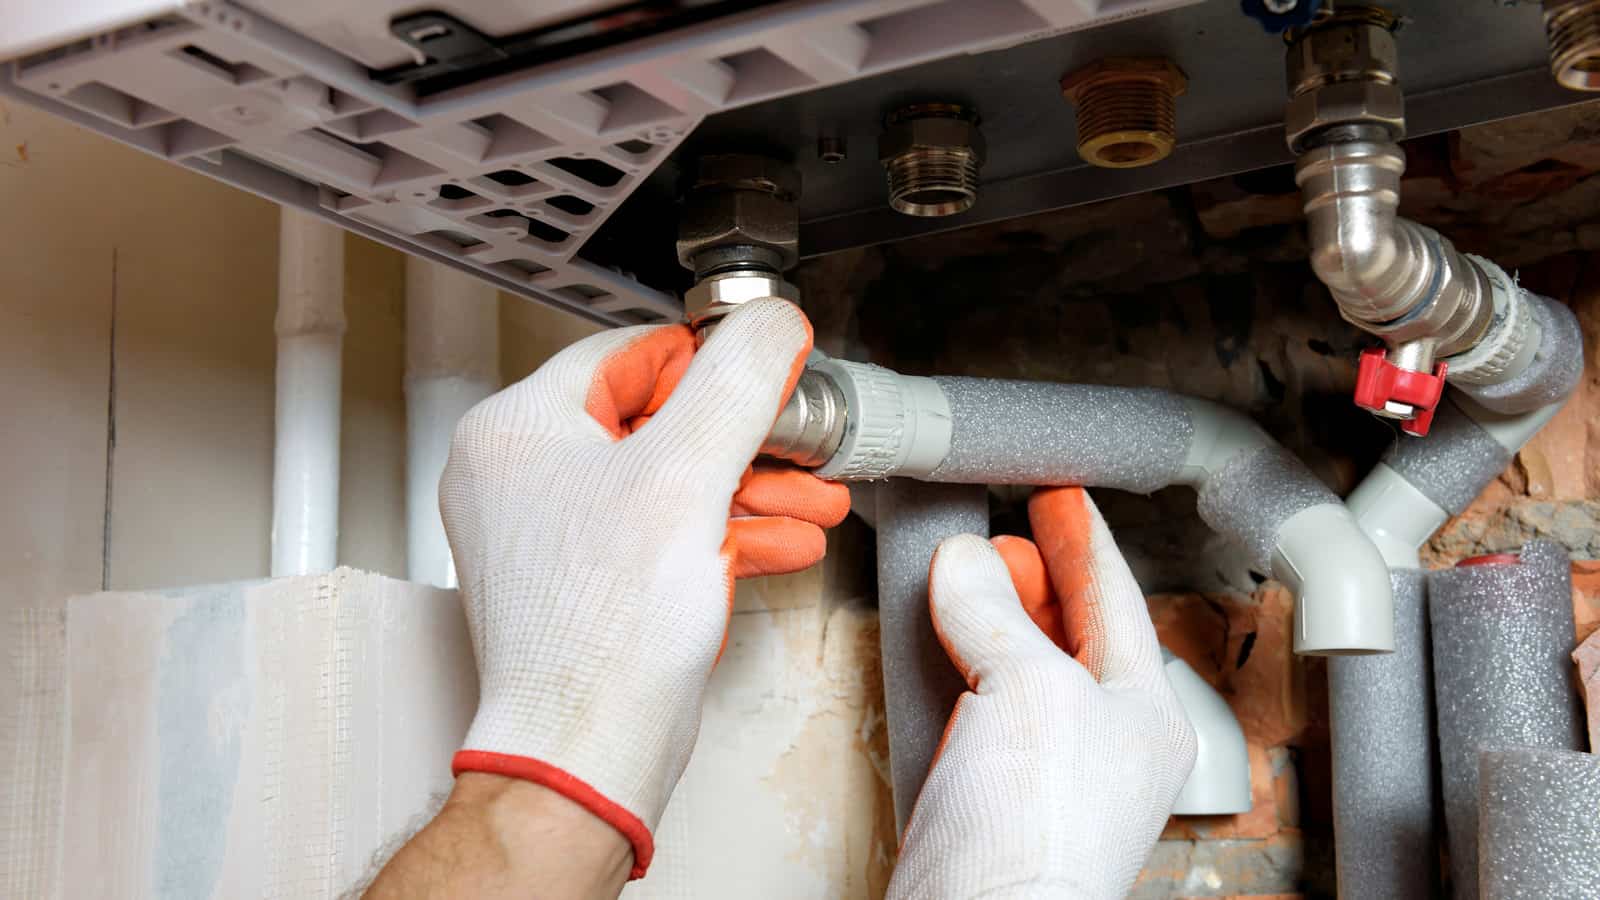 NJ Affordable HVAC Plumbing And Drain Cleaning of Nutley